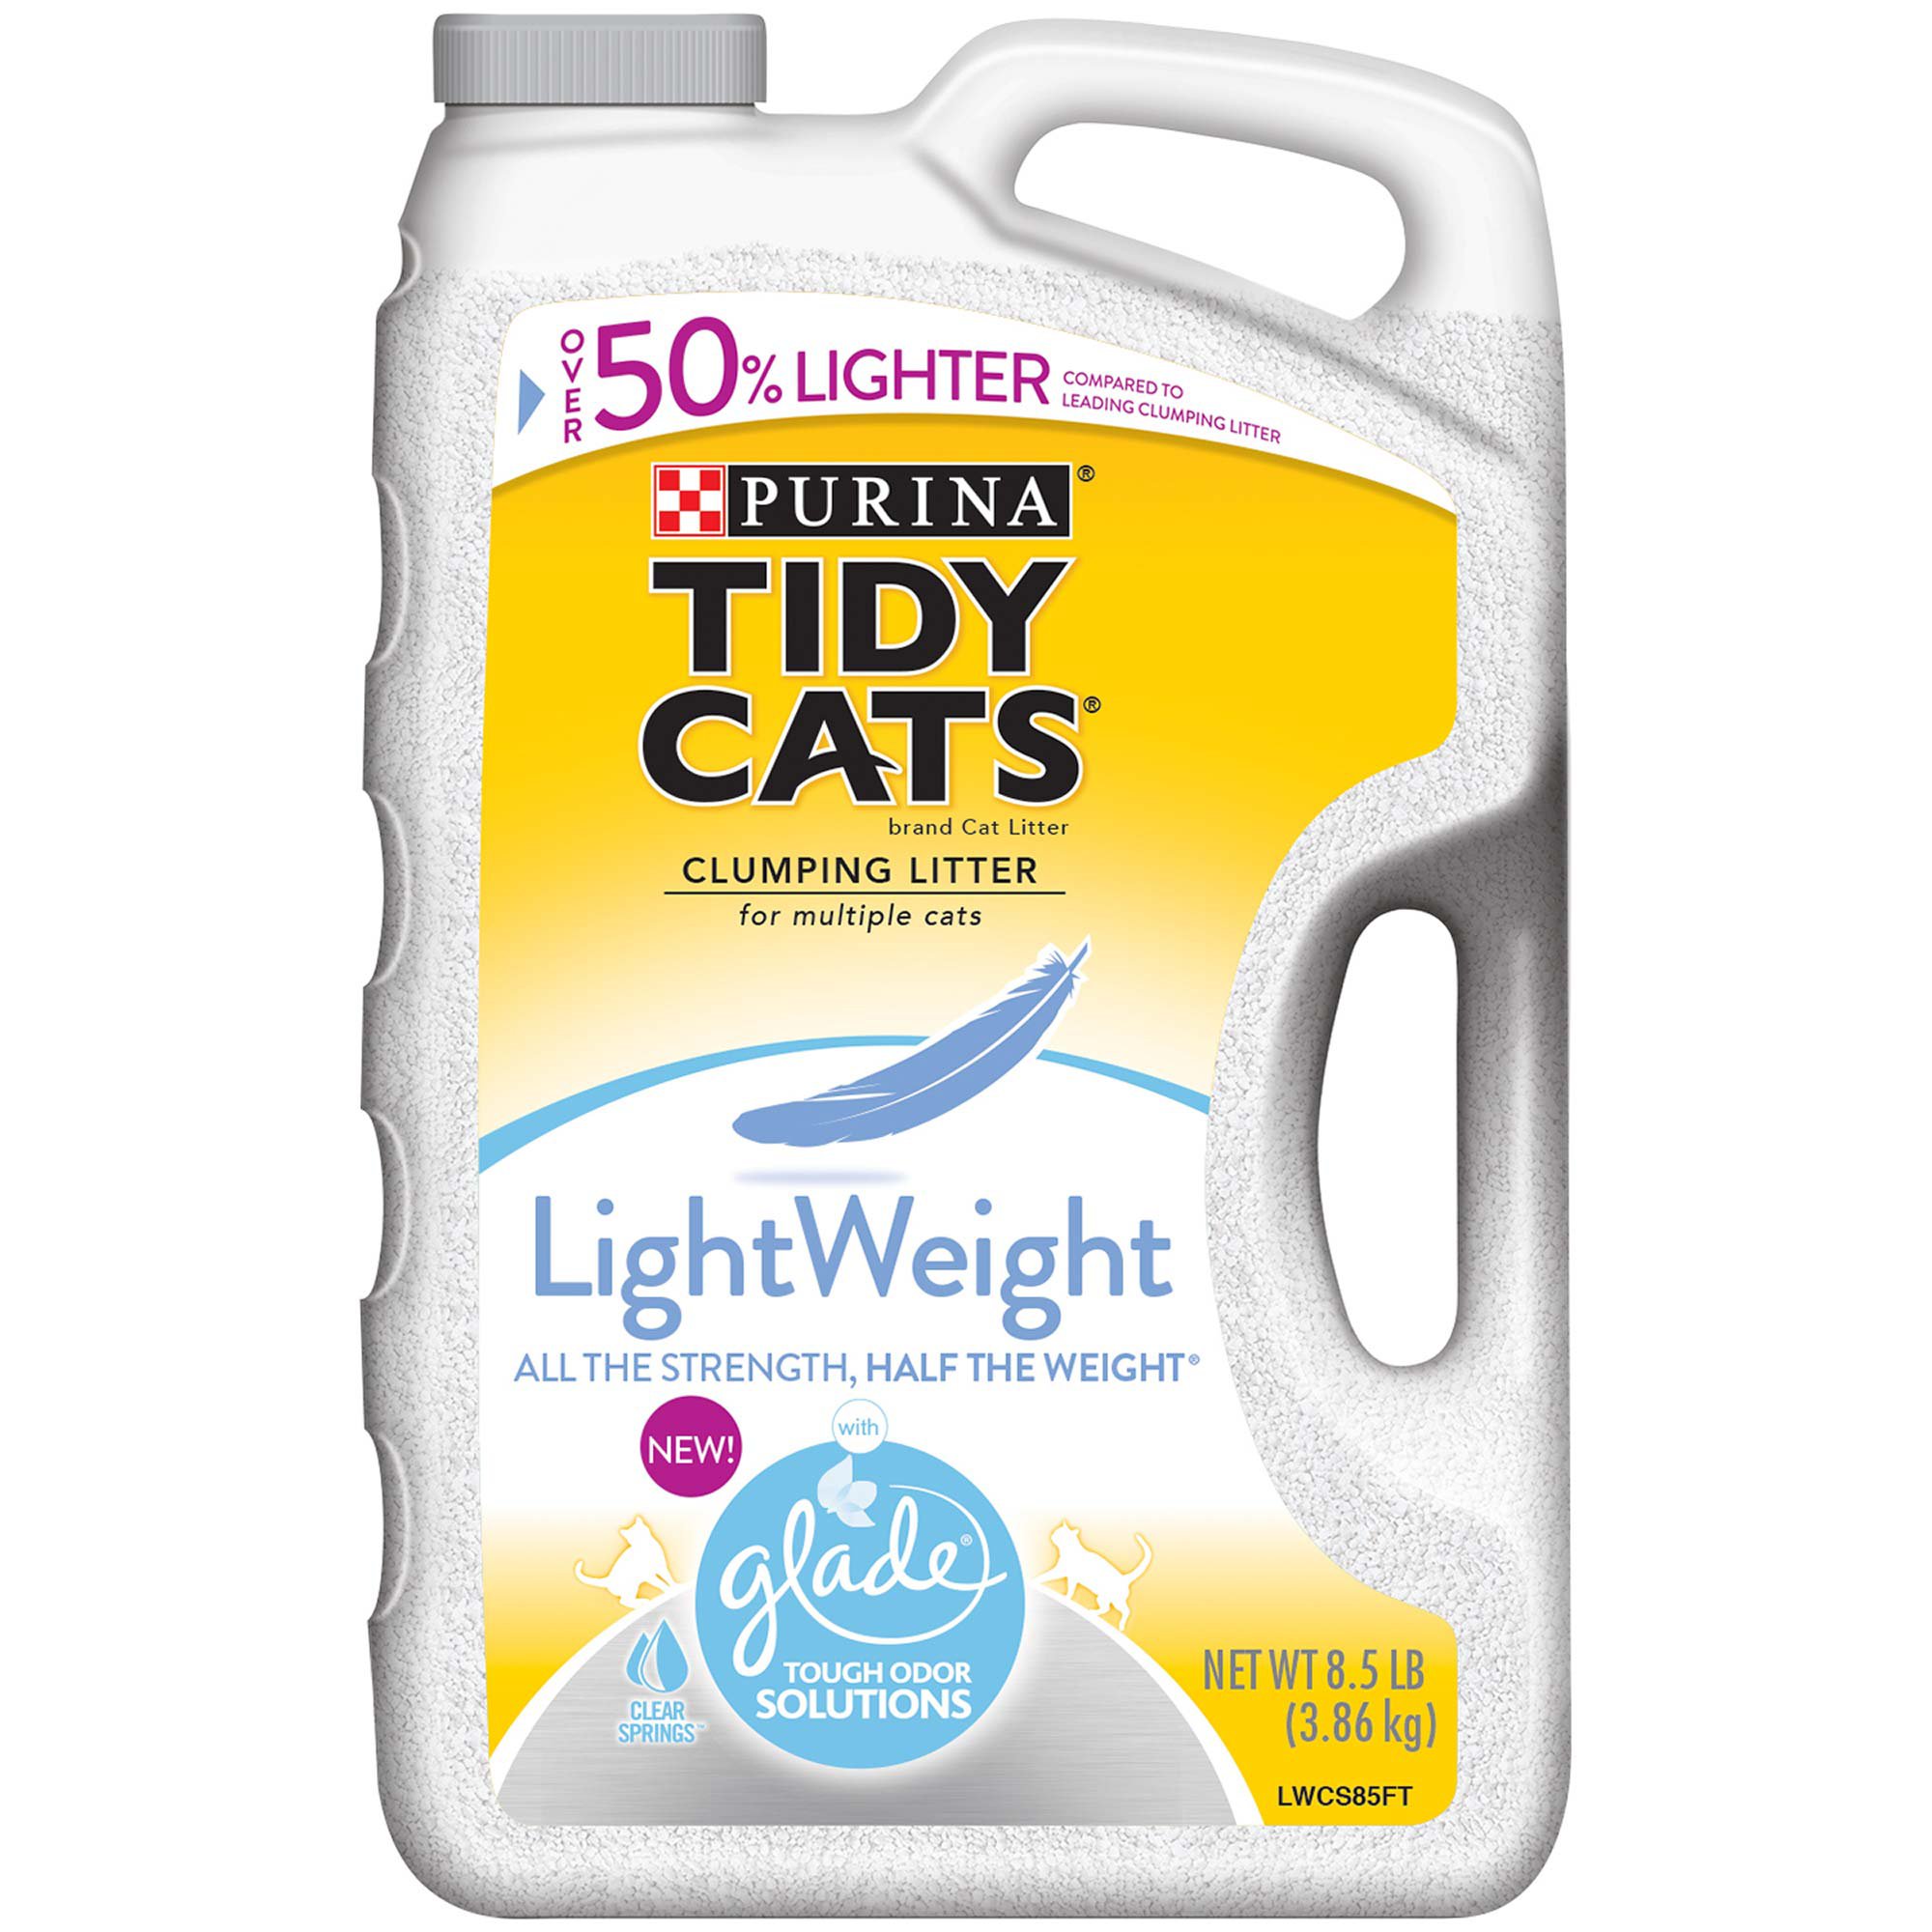 Purina Tidy Cats Light Weight With Glade Tough Odor Solutions Clear